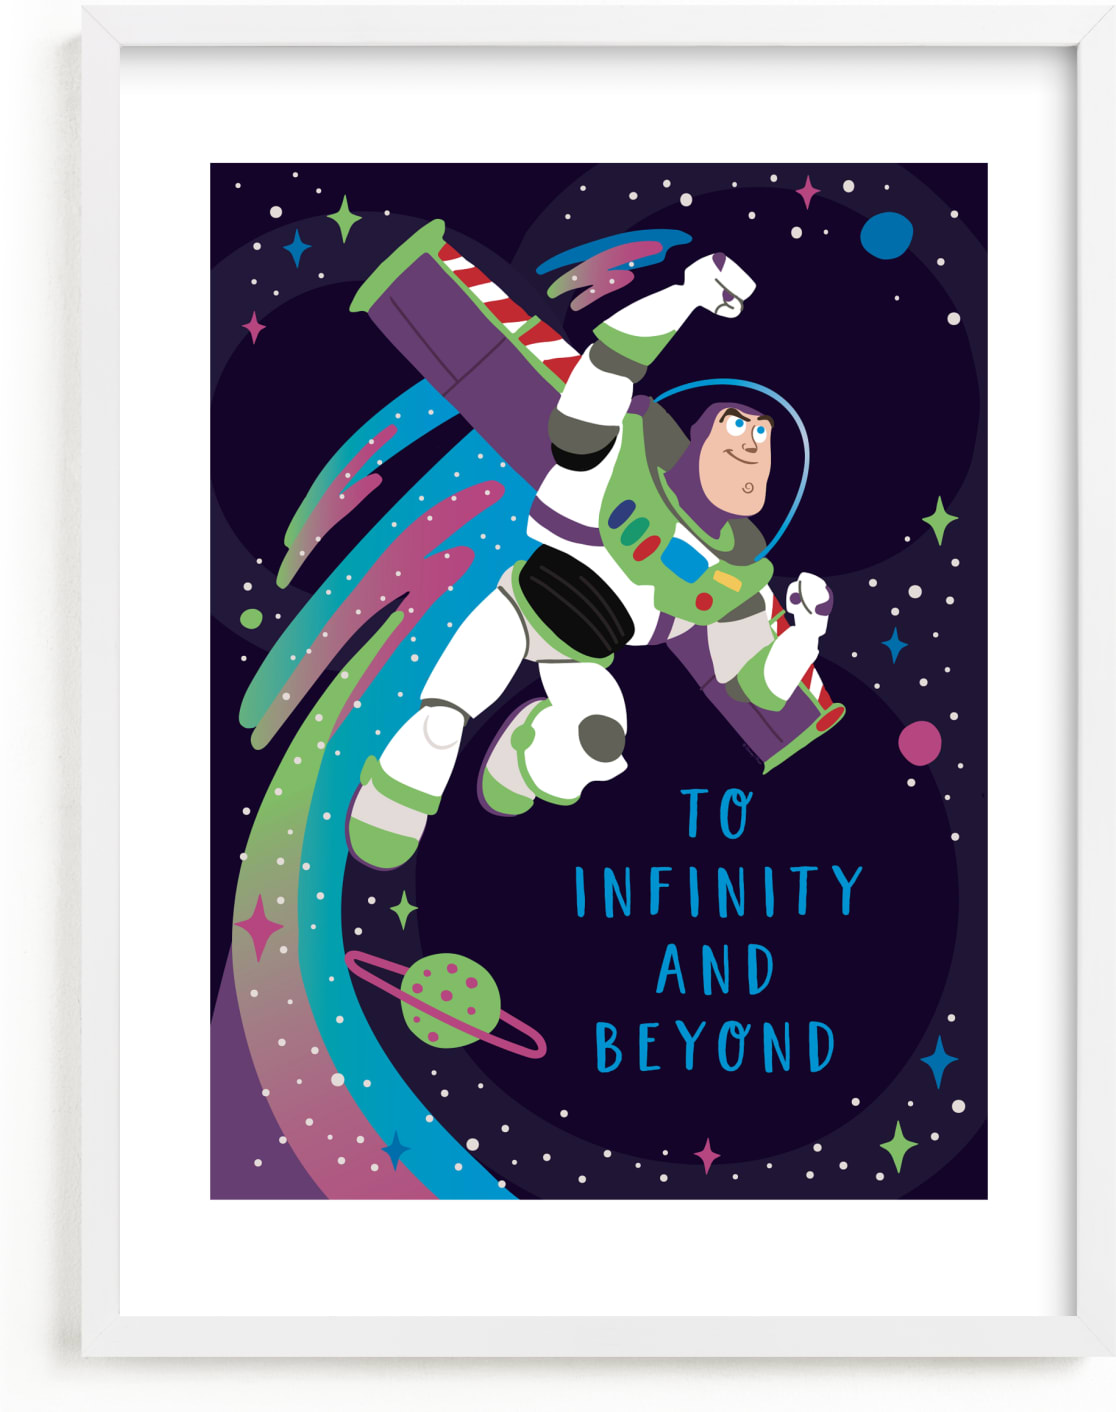 This is a blue disney art by Katie Zimpel called Disney and Pixar Buzz Lightyear.